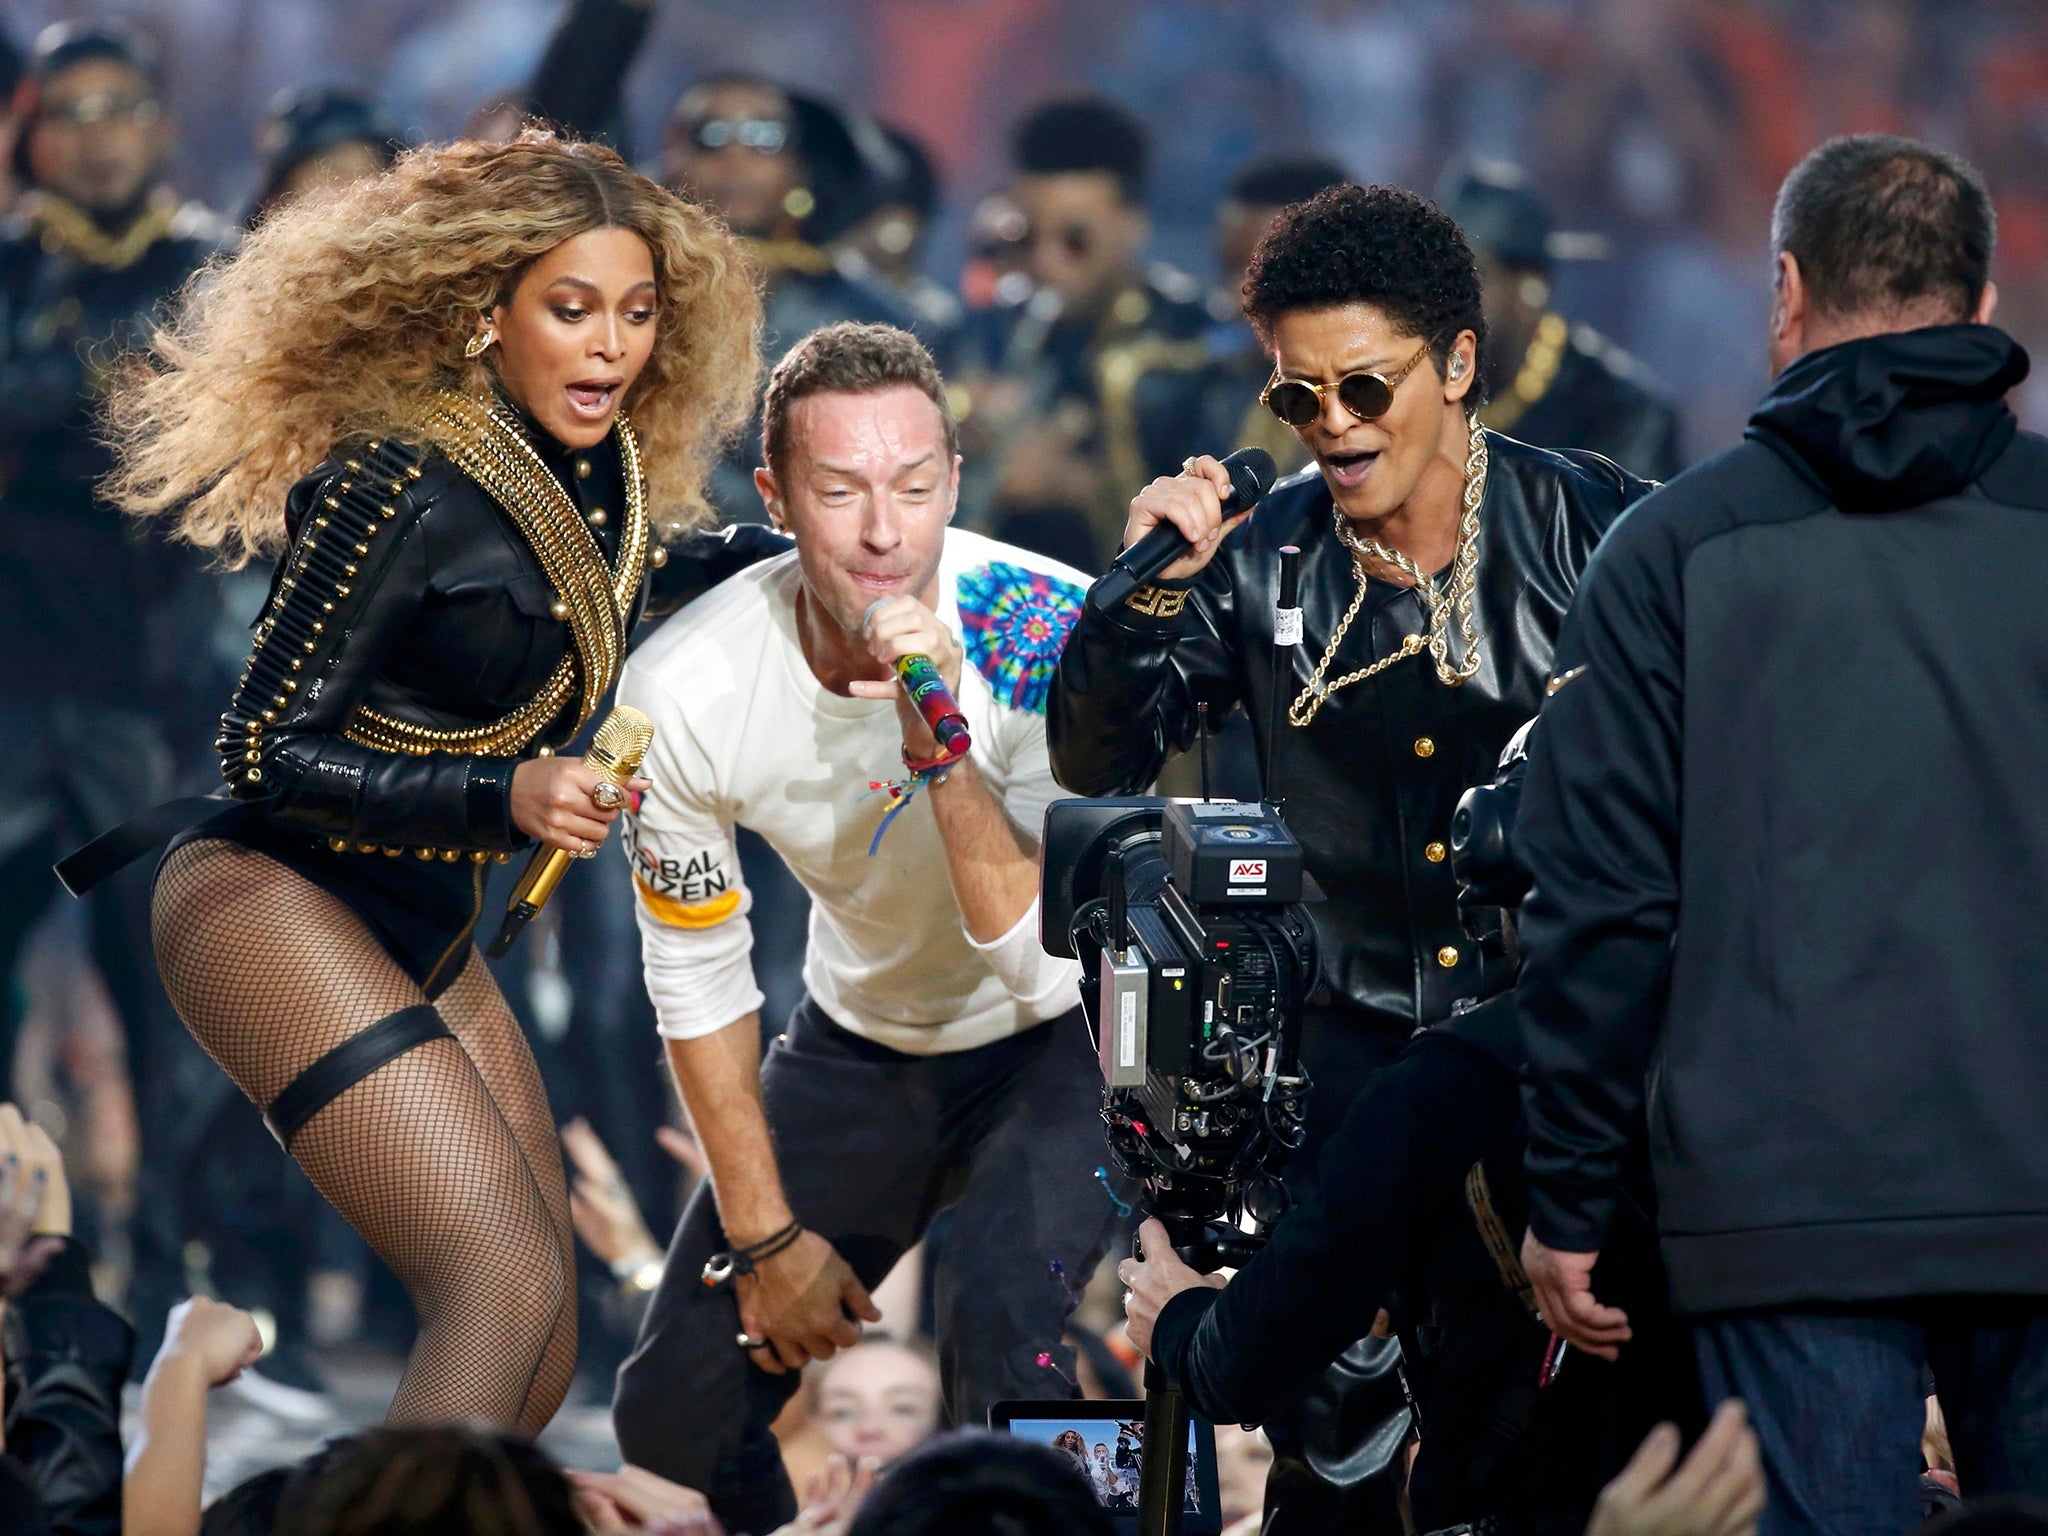 Leave Chris Martin's performance at Super Bowl 50 alone, he's done